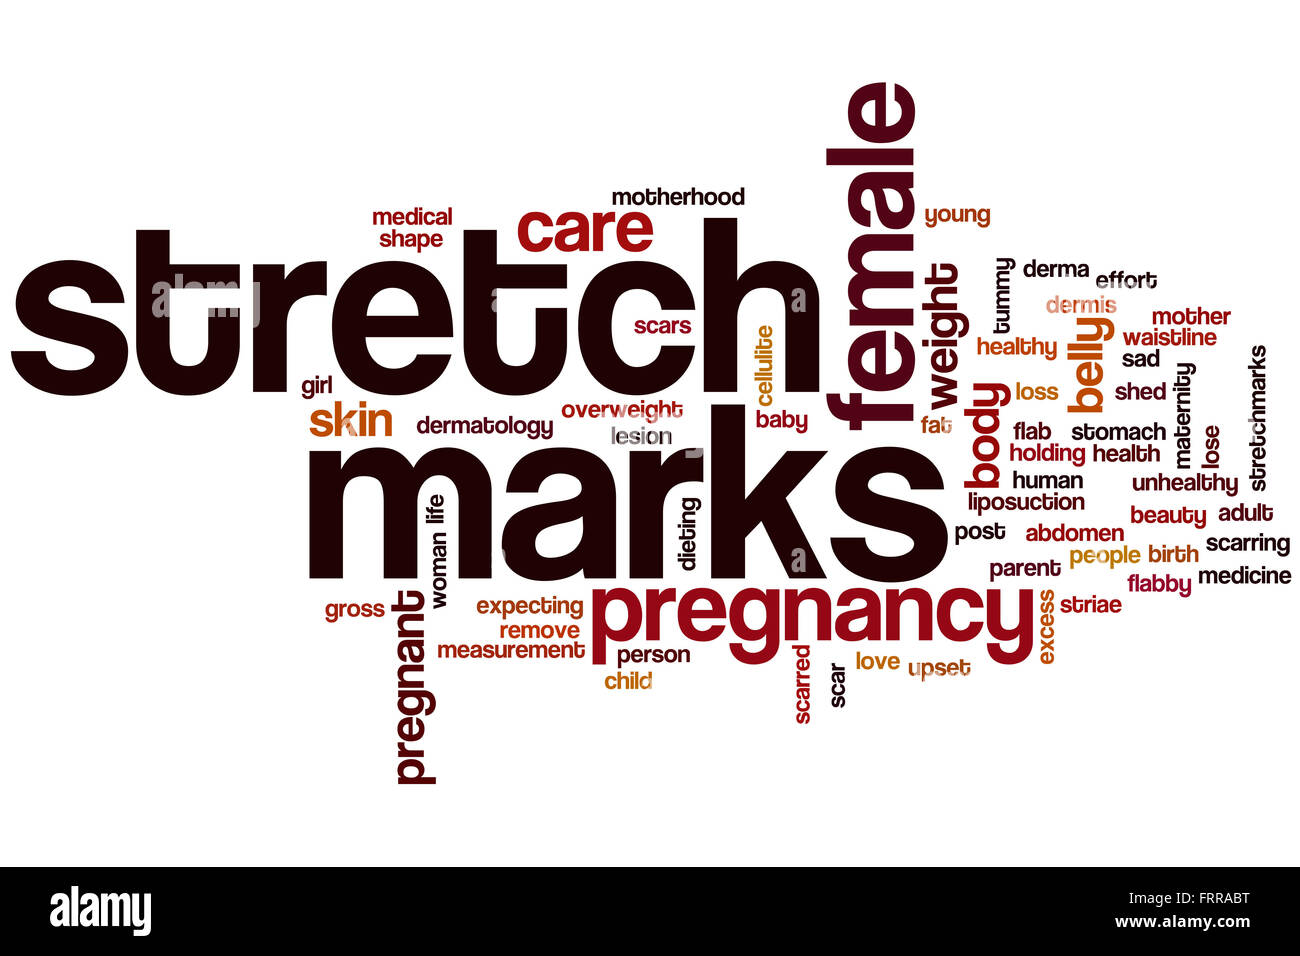 Stretch marks word cloud concept Stock Photo